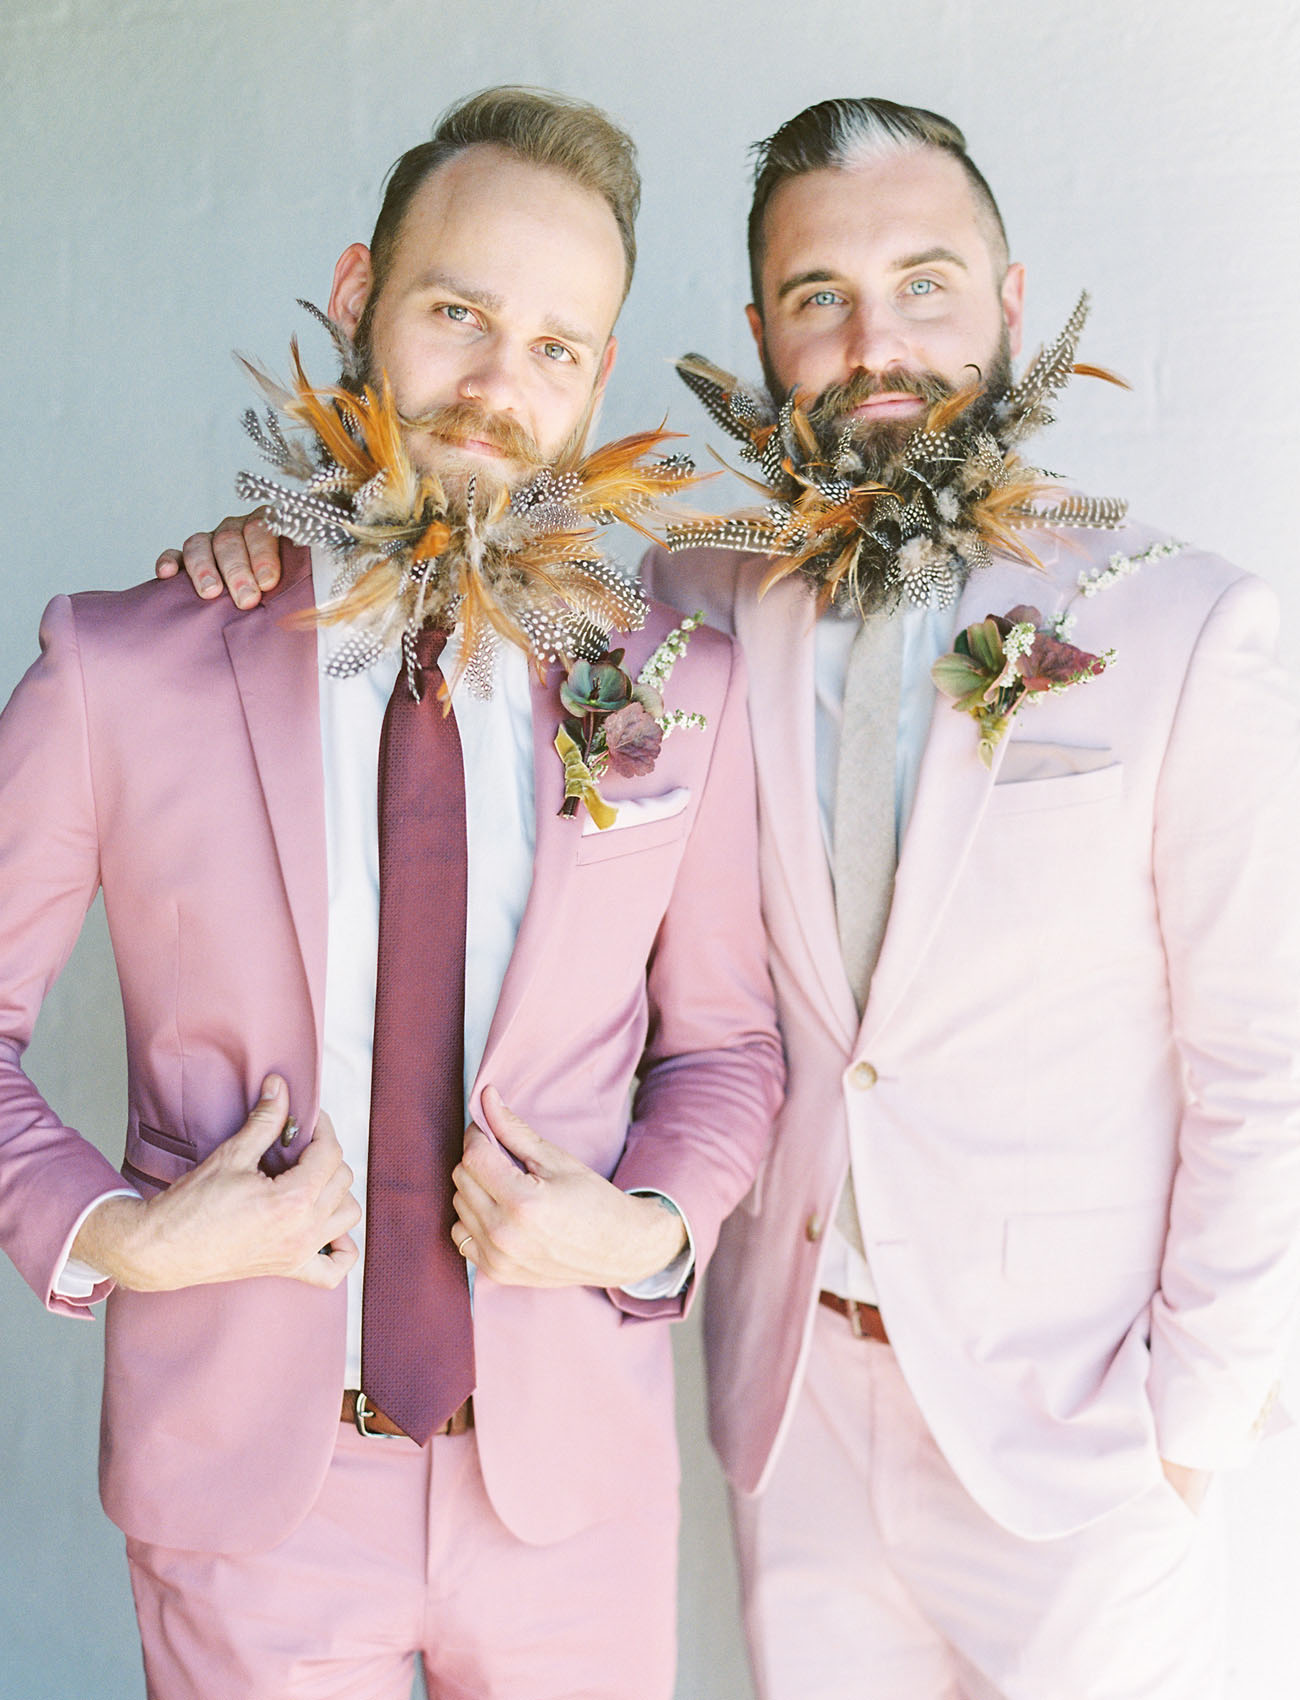 The grooms were rocking light pink suits, with a burgundy and grey tie, and fancy beards styled with feathers